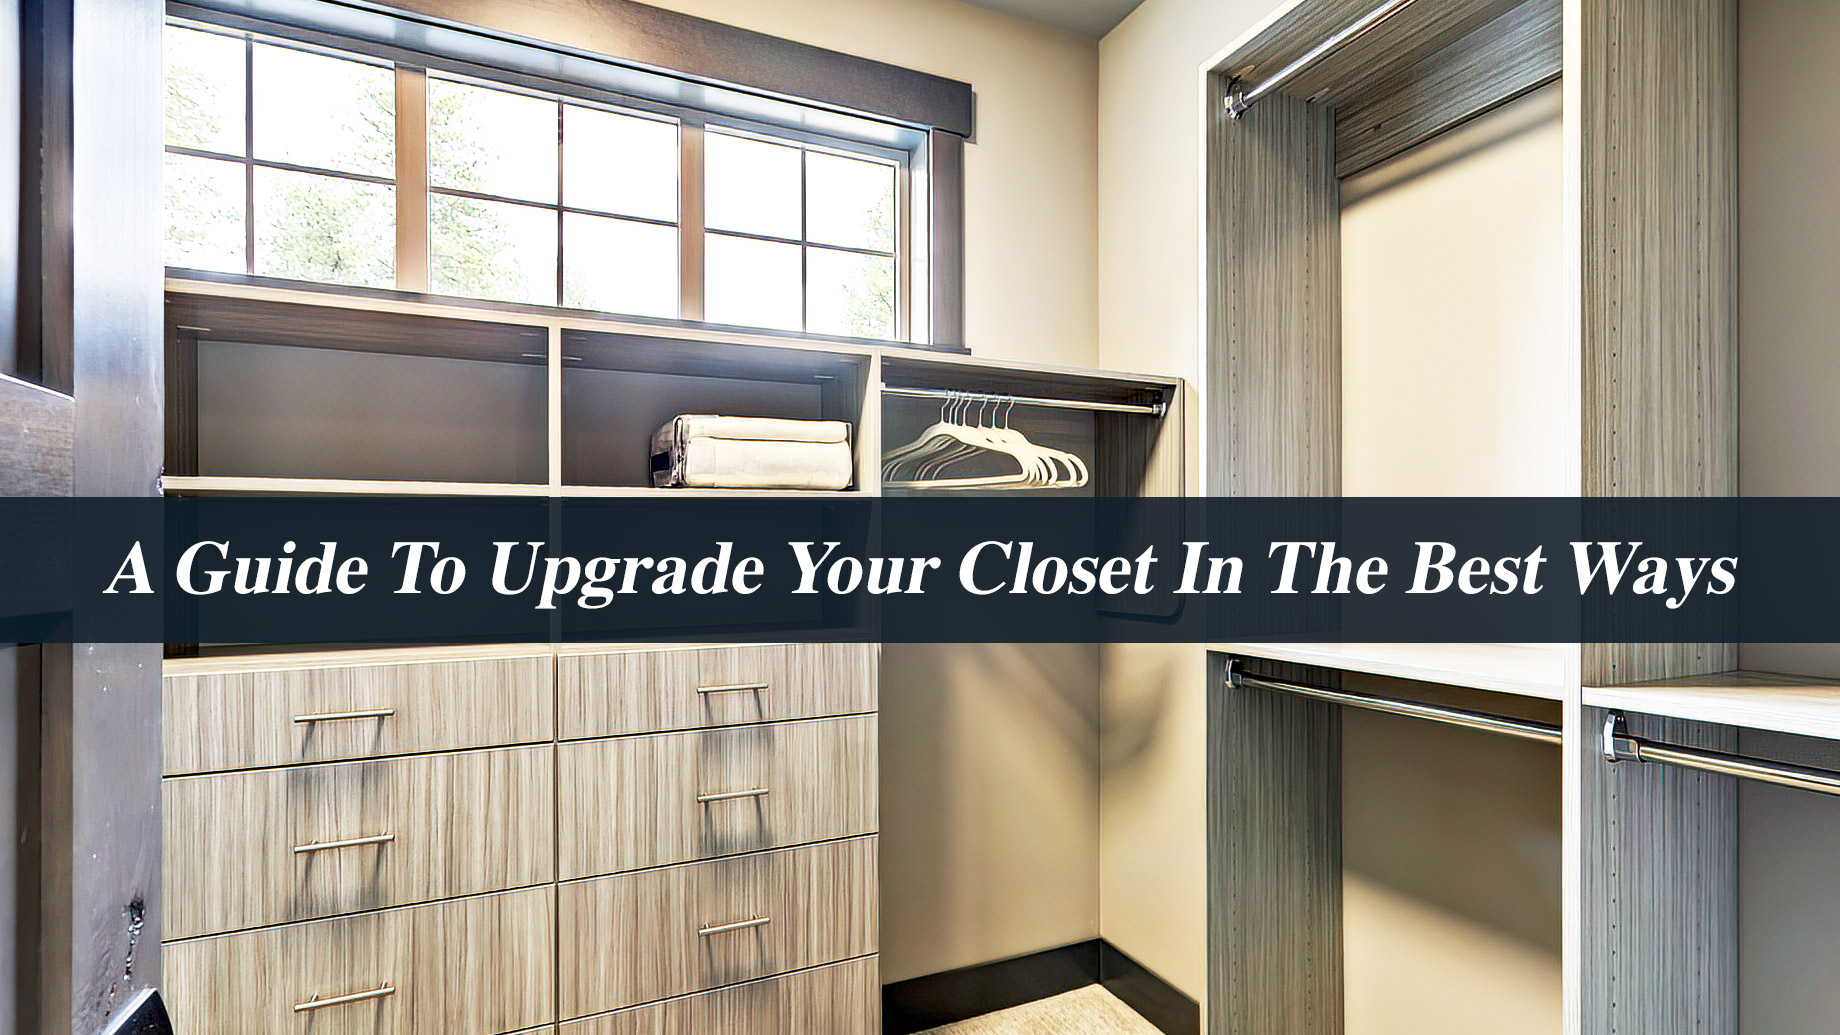 A Guide To Upgrade Your Closet In The Best Ways